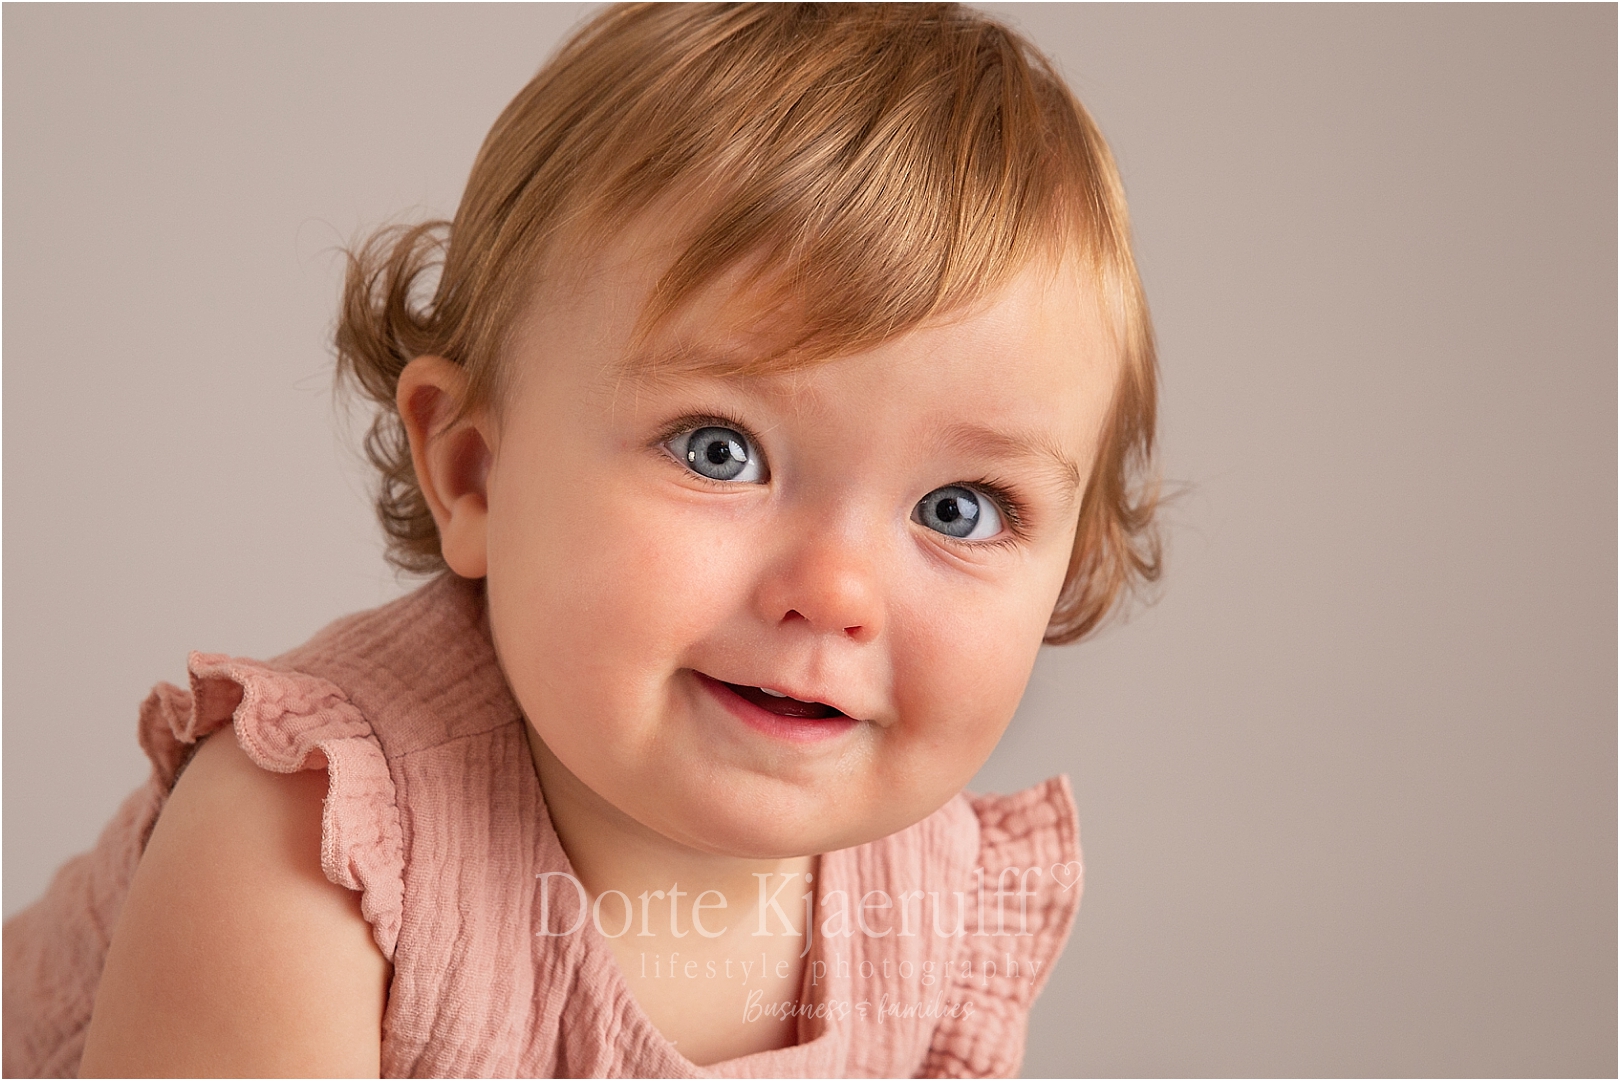 Older baby photography